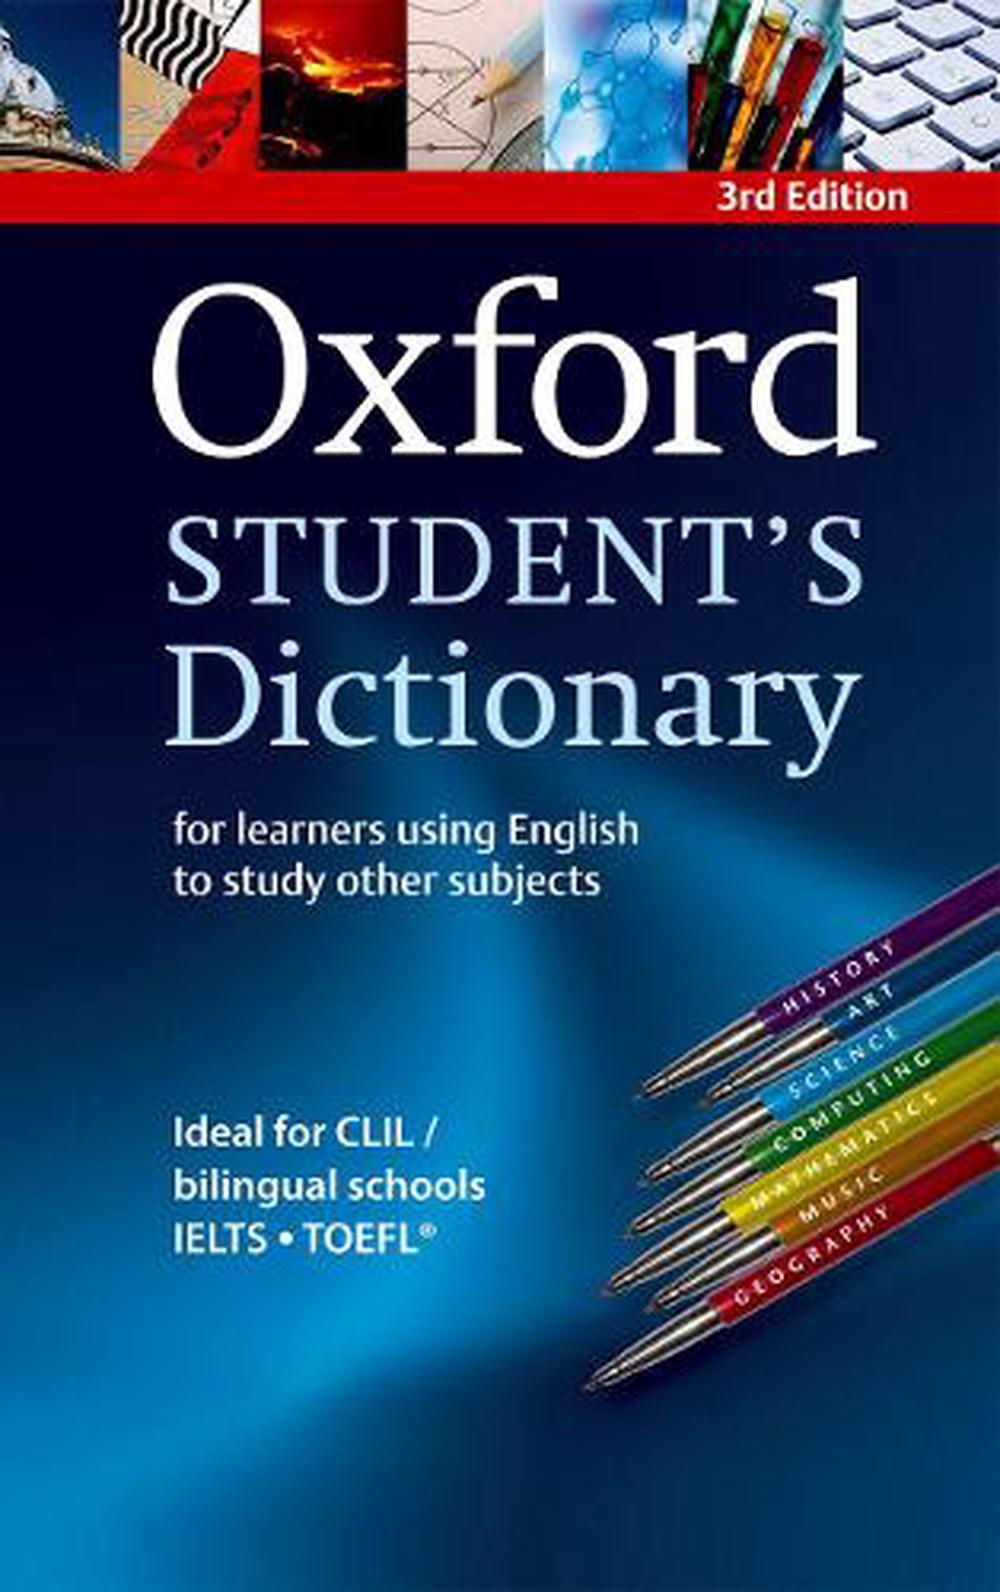 Oxford Student's Dictionary Paperback by Oxford Dictionary